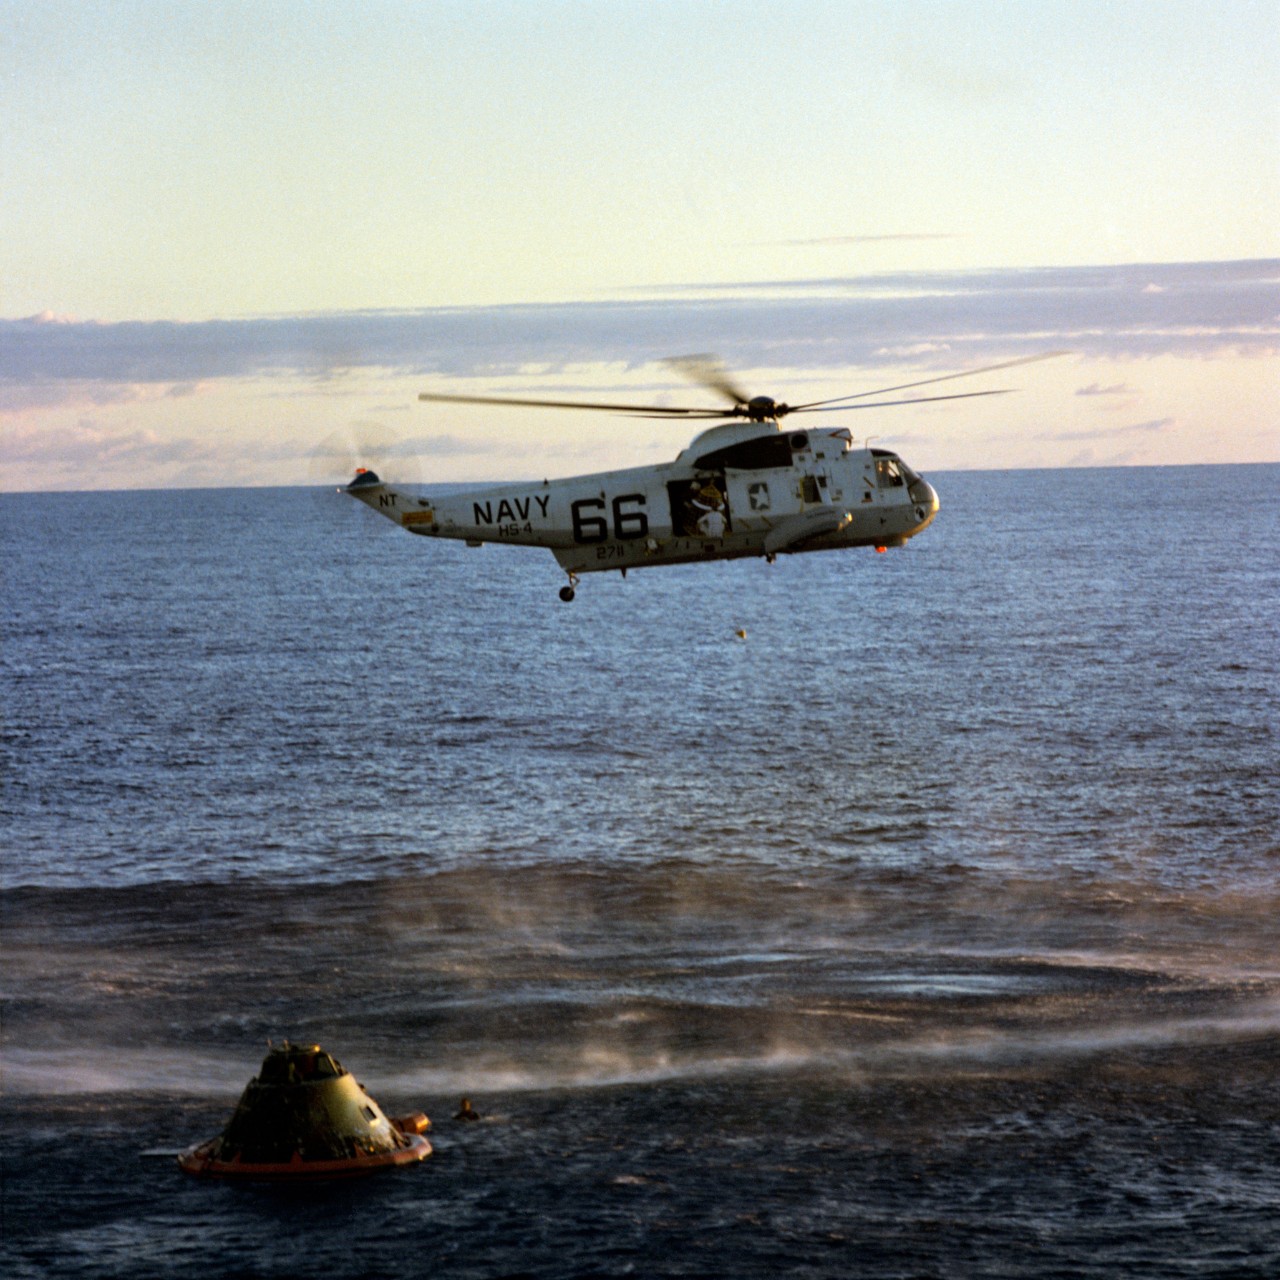 1969 - Helo 66 Recovers Charlie Brown Helicopter 66 of Helicopter Anti-Submarine Squadron Four hovers over Apollo 10’s Command Module (mission callsign “Charlie Brown”), 1968. The Navy used “66” to recover Astronauts from Apollo 8, 10, 11,12, and 13 and a national television audience saw it each time. As a result of its fame, the Navy purposely kept the number “66” on the bird even when the Navy switched to a three digit identification system. (Photo courtesy of NASA)